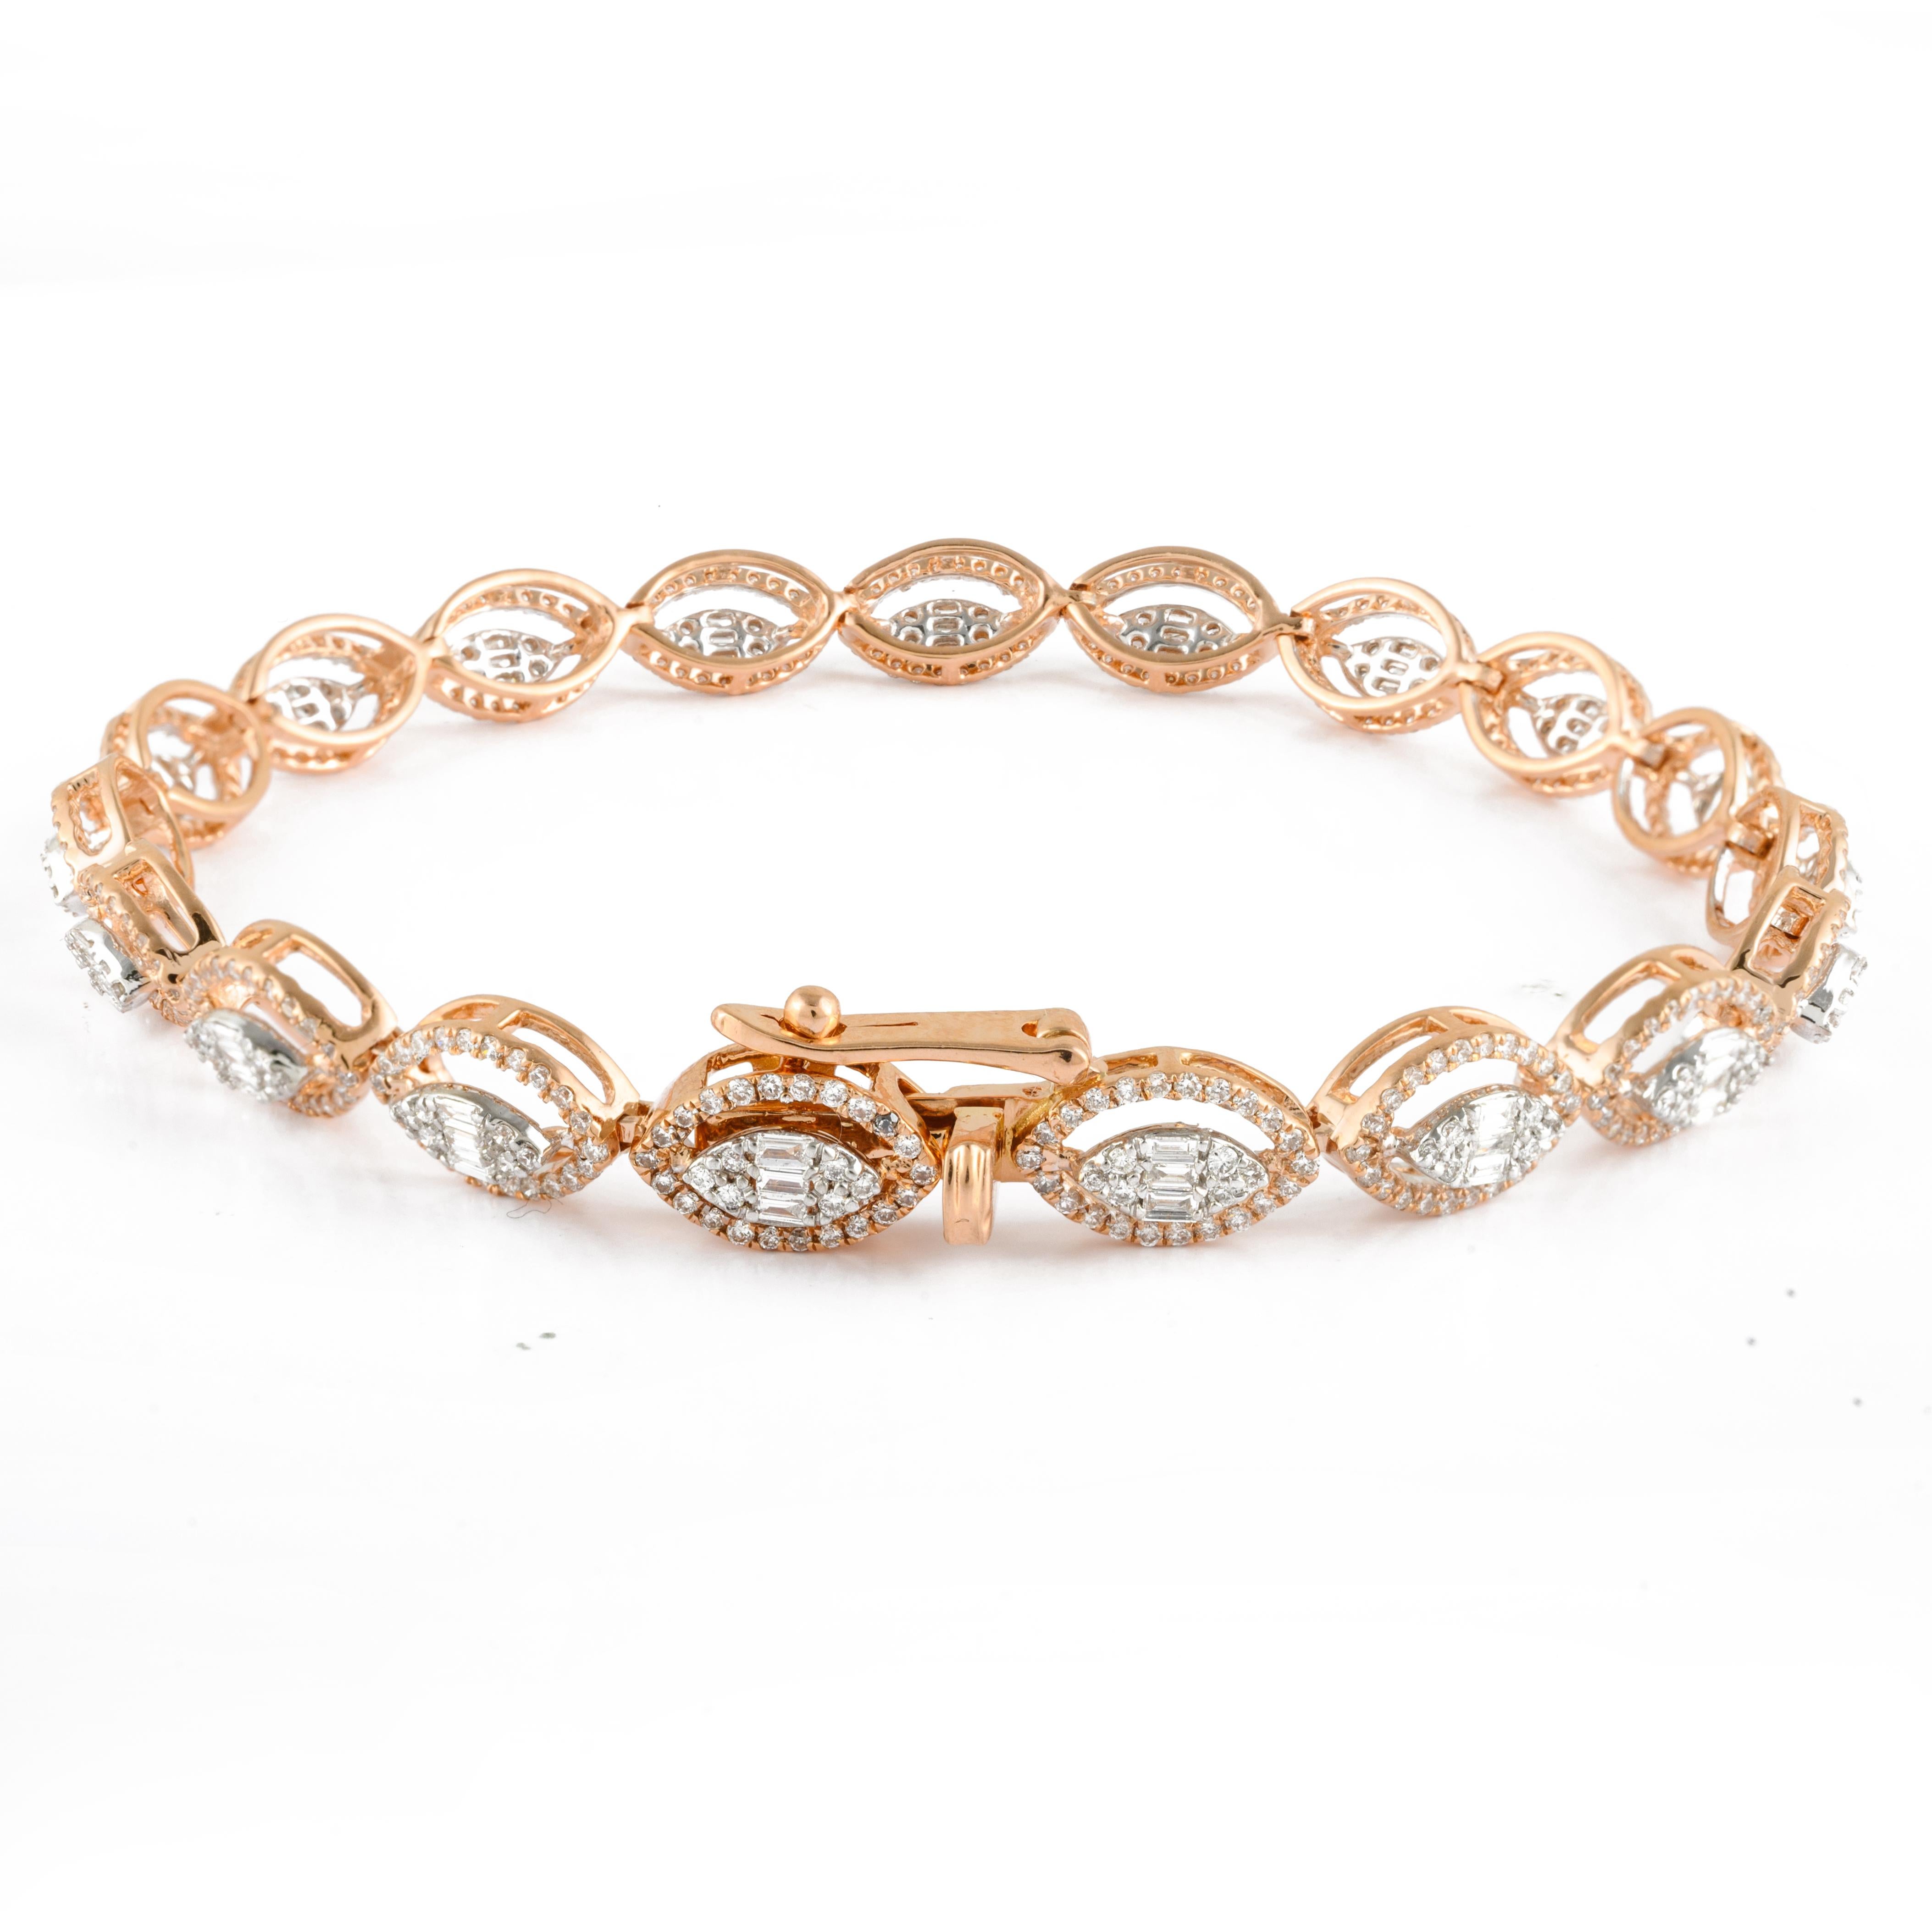 This Glamorous Diamond Tennis Bracelet in 18K gold showcases 589 endlessly sparkling natural diamonds, weighing 1.86 carat. It measures 7 inches long in length. 
April birthstone diamond brings love, fame, success and prosperity.
Designed with